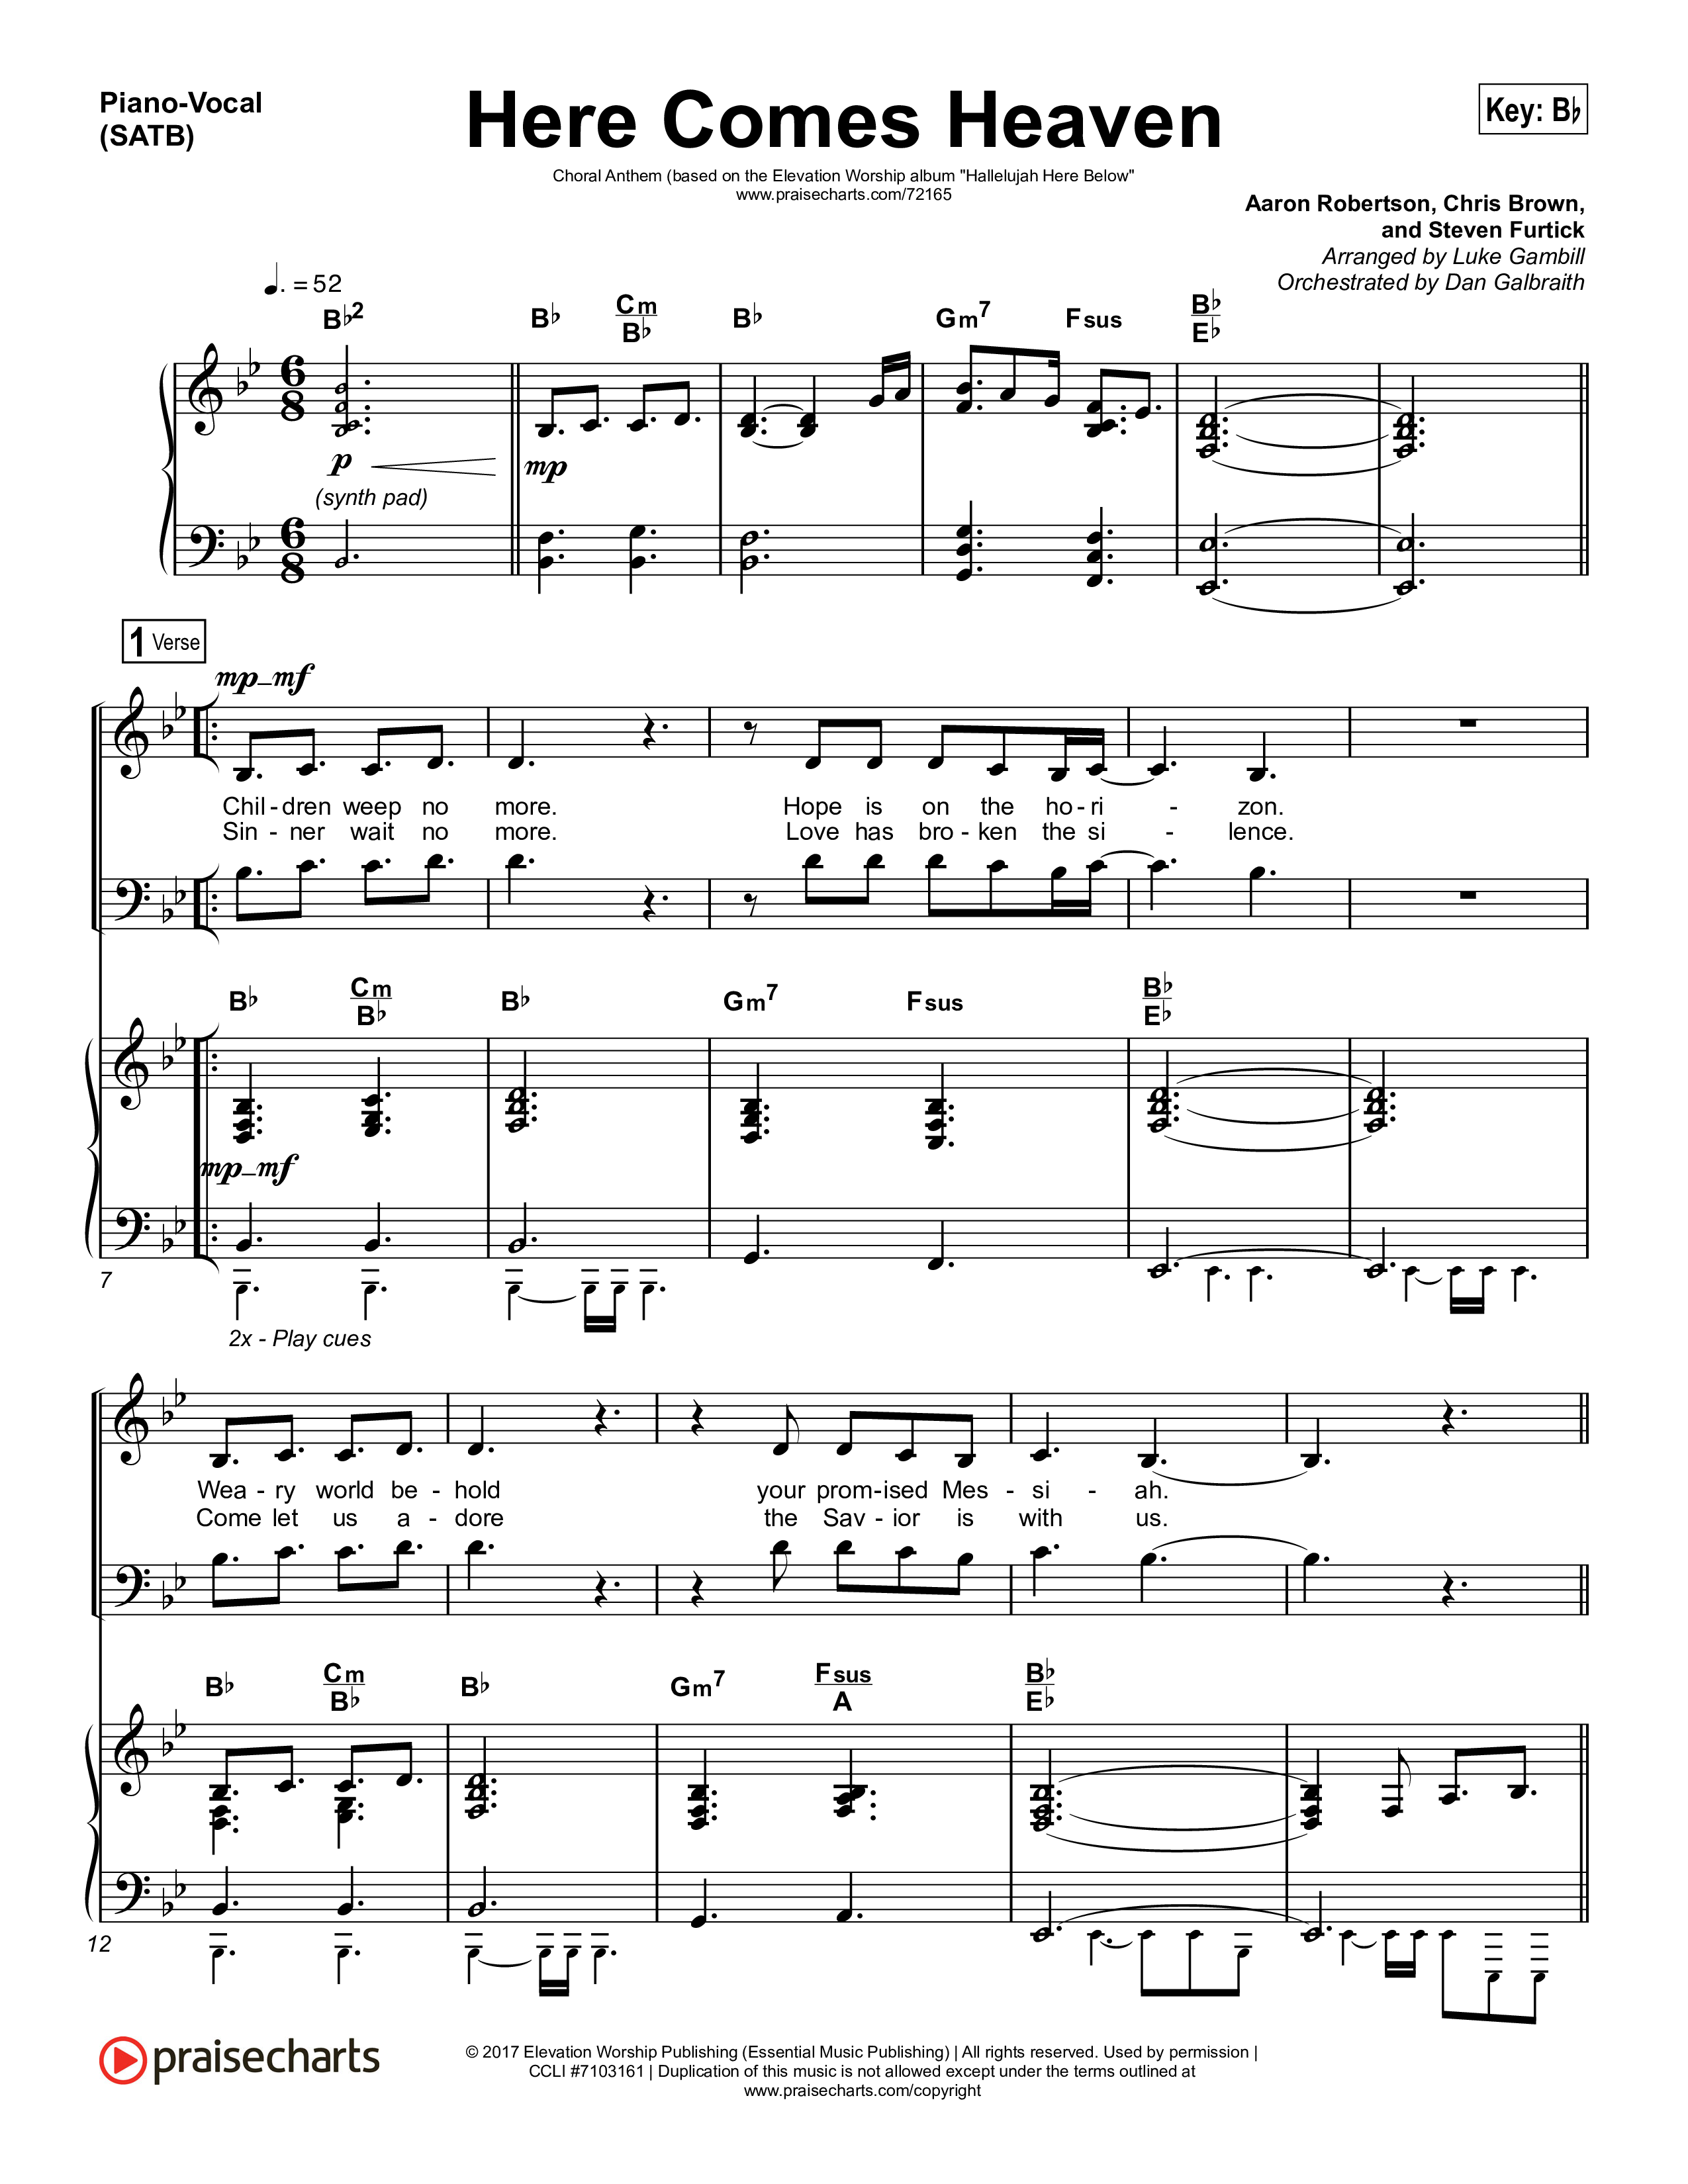 Here Comes Heaven (Choral Anthem SATB) Piano/Vocal (SATB) (Elevation Worship / Arr. Luke Gambill)